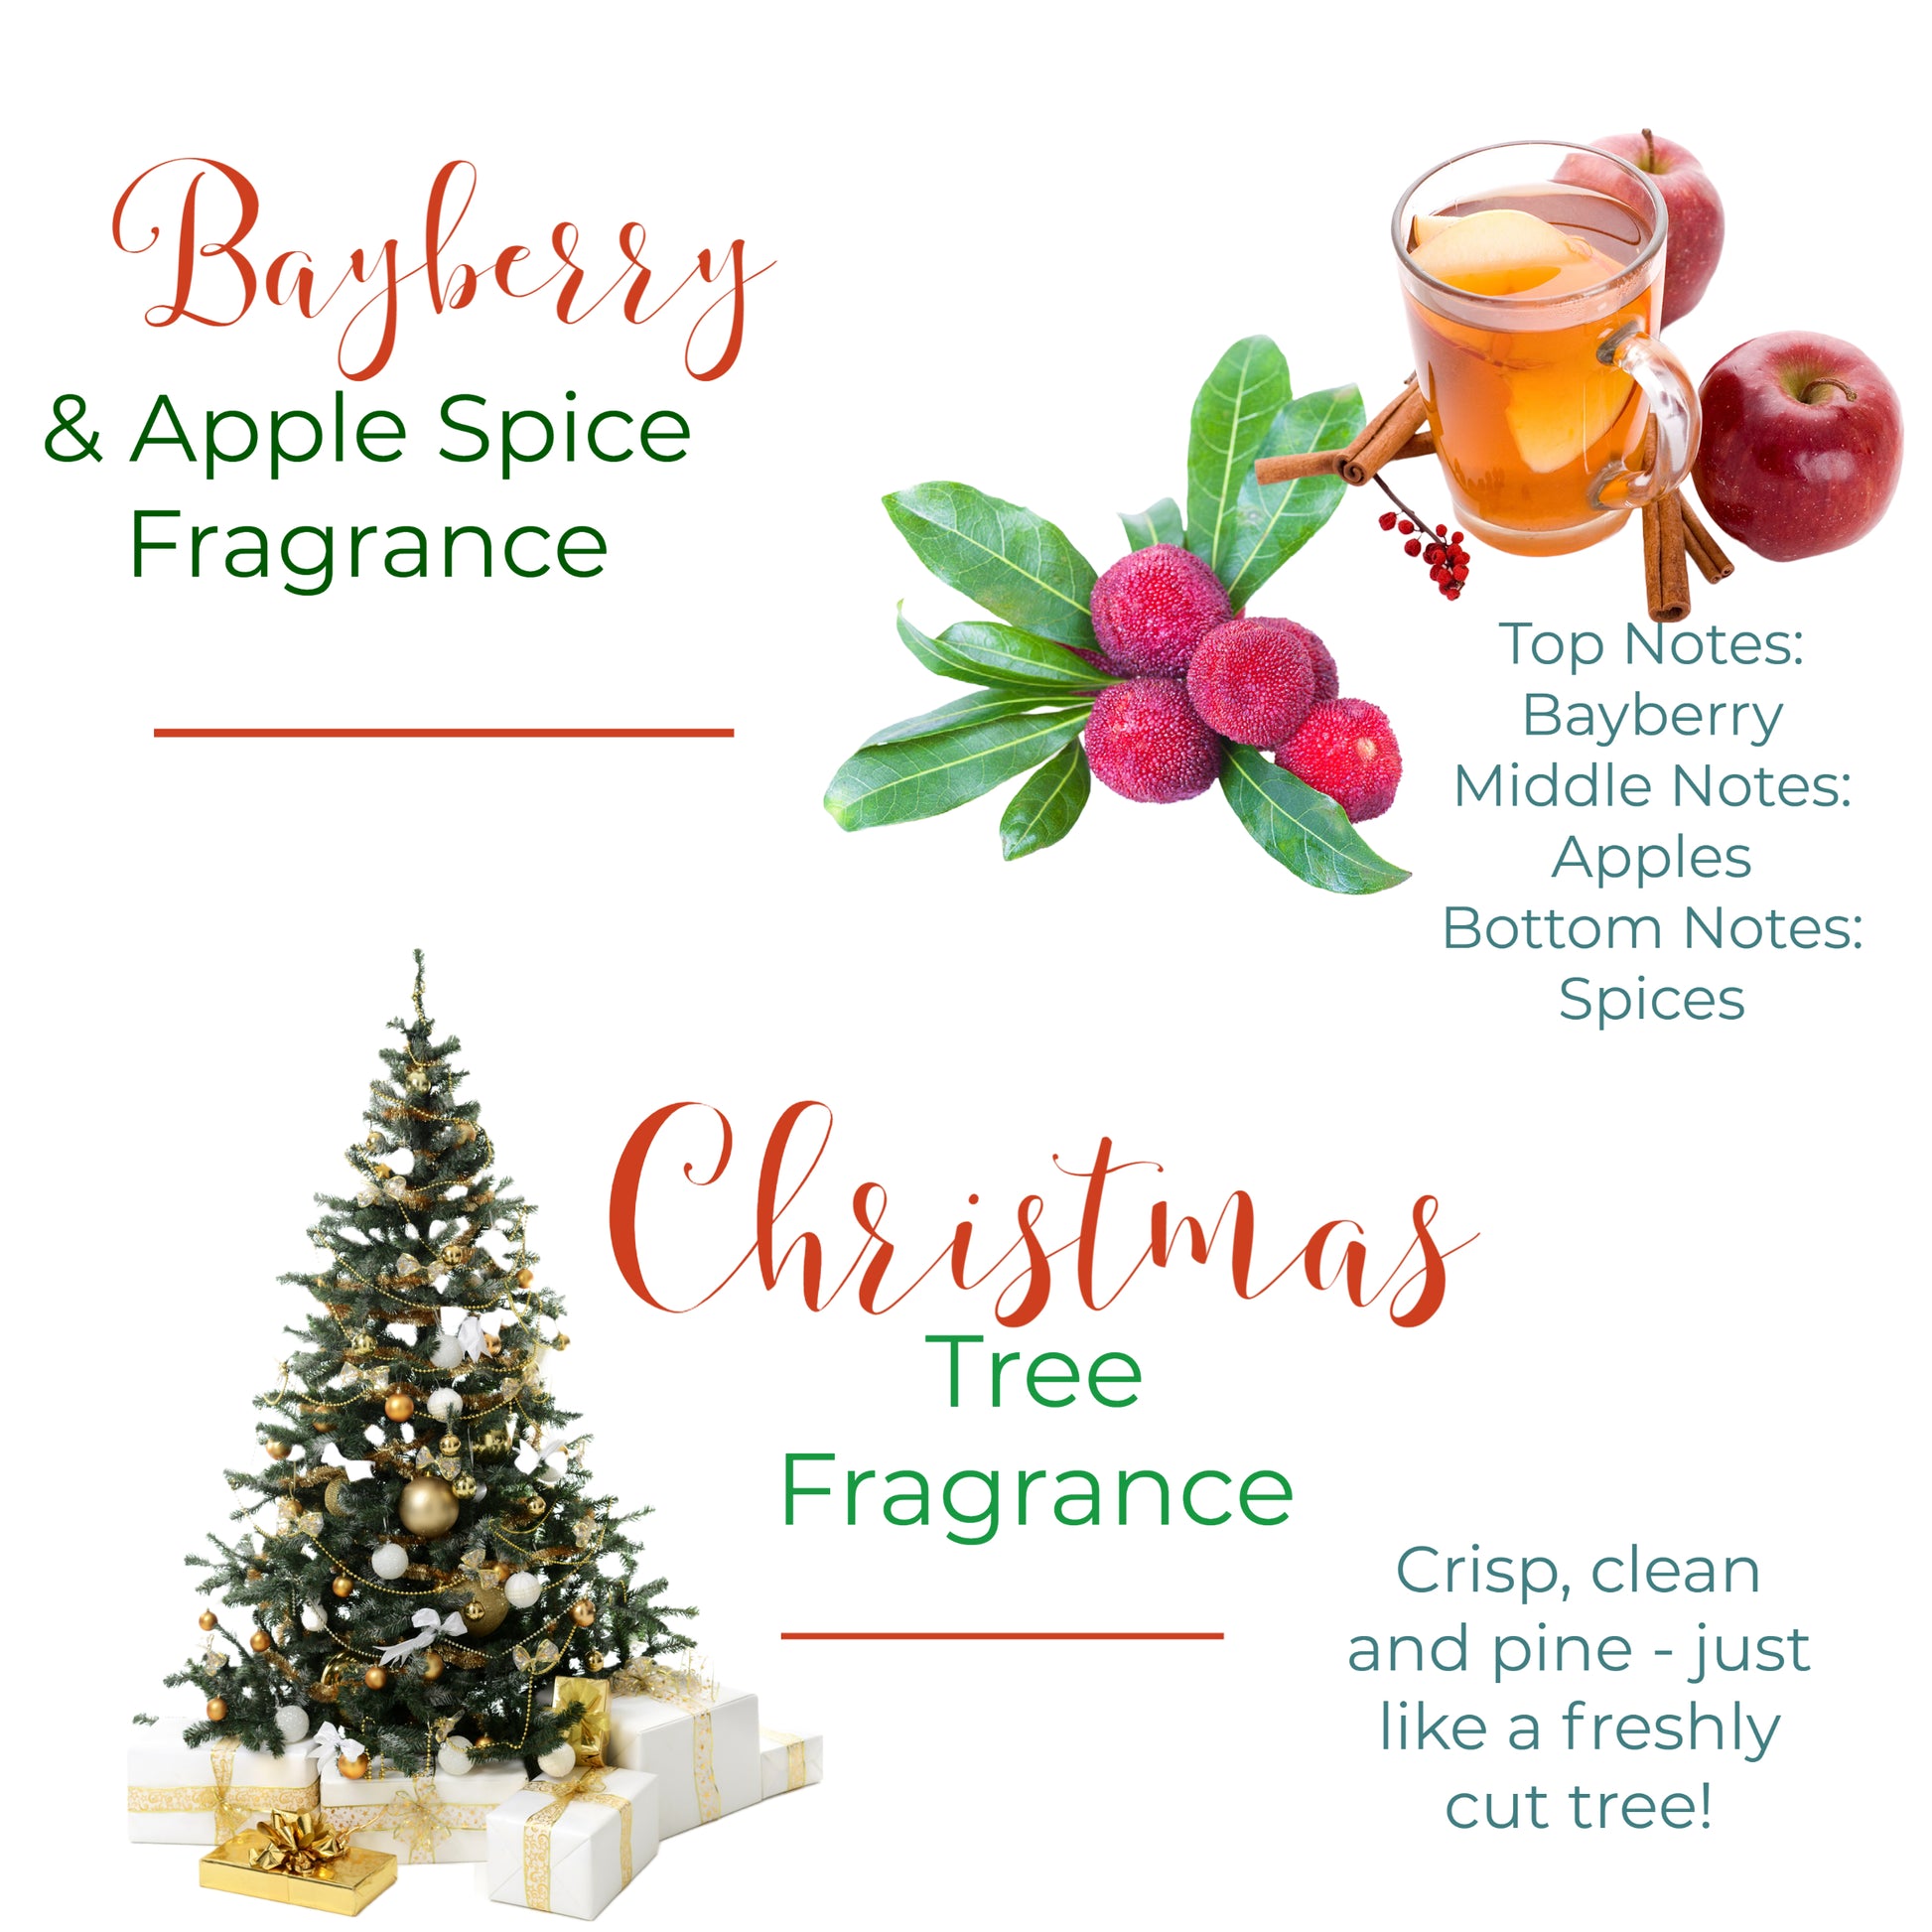 Christmas candle making kit for diy candle makers with soy wax and four candle vessels made of glass holiday fragrances for gift and stocking stuffers